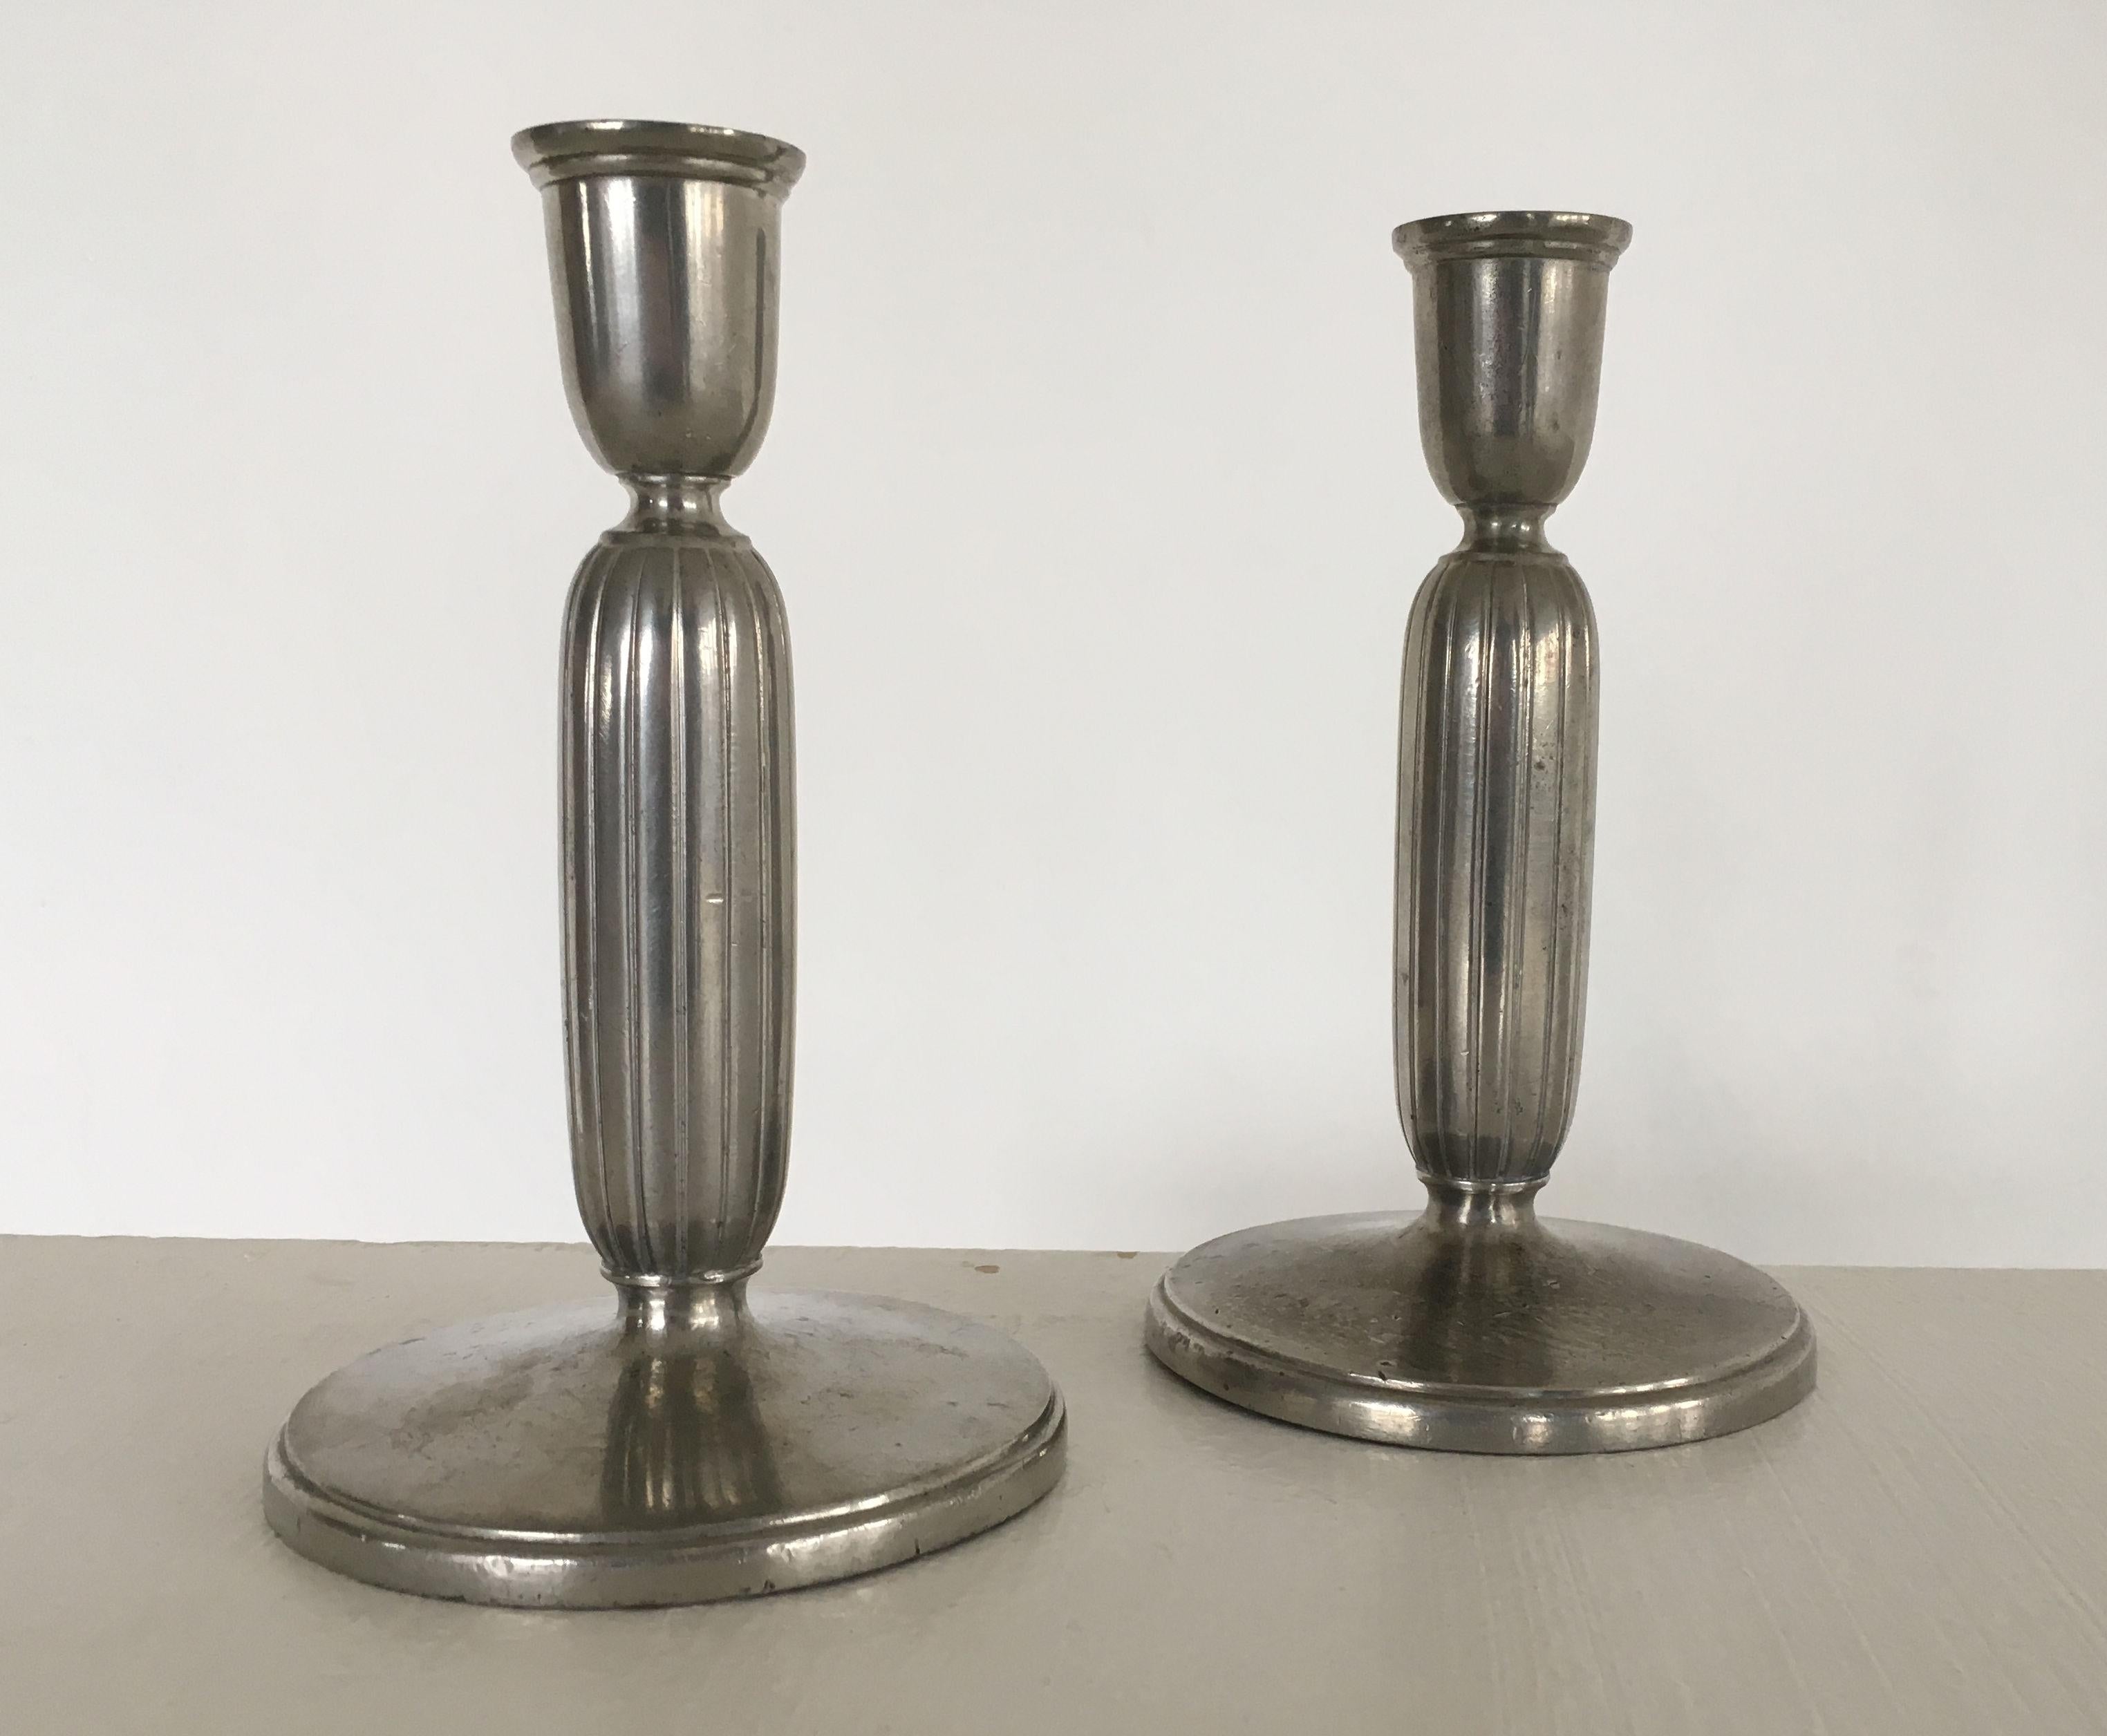 Pair of Art Deco pewter candlesticks by Just Andersen

The candlesticks are in good vintage condition.

Marked Just. A. no, 2574. H.

 